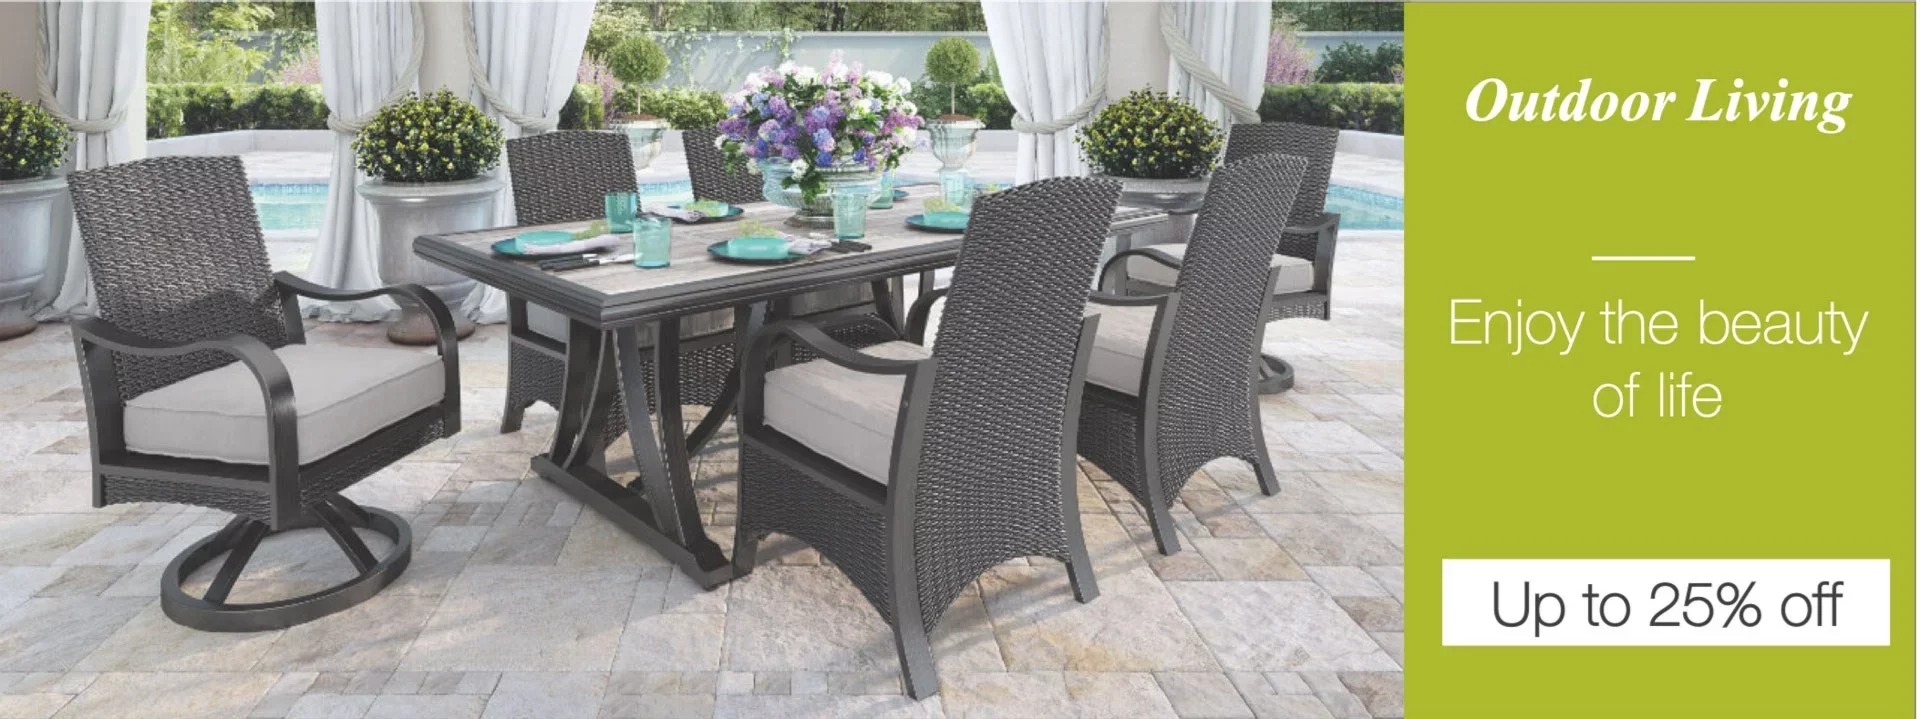 shop outdoor furniture up to 25% off